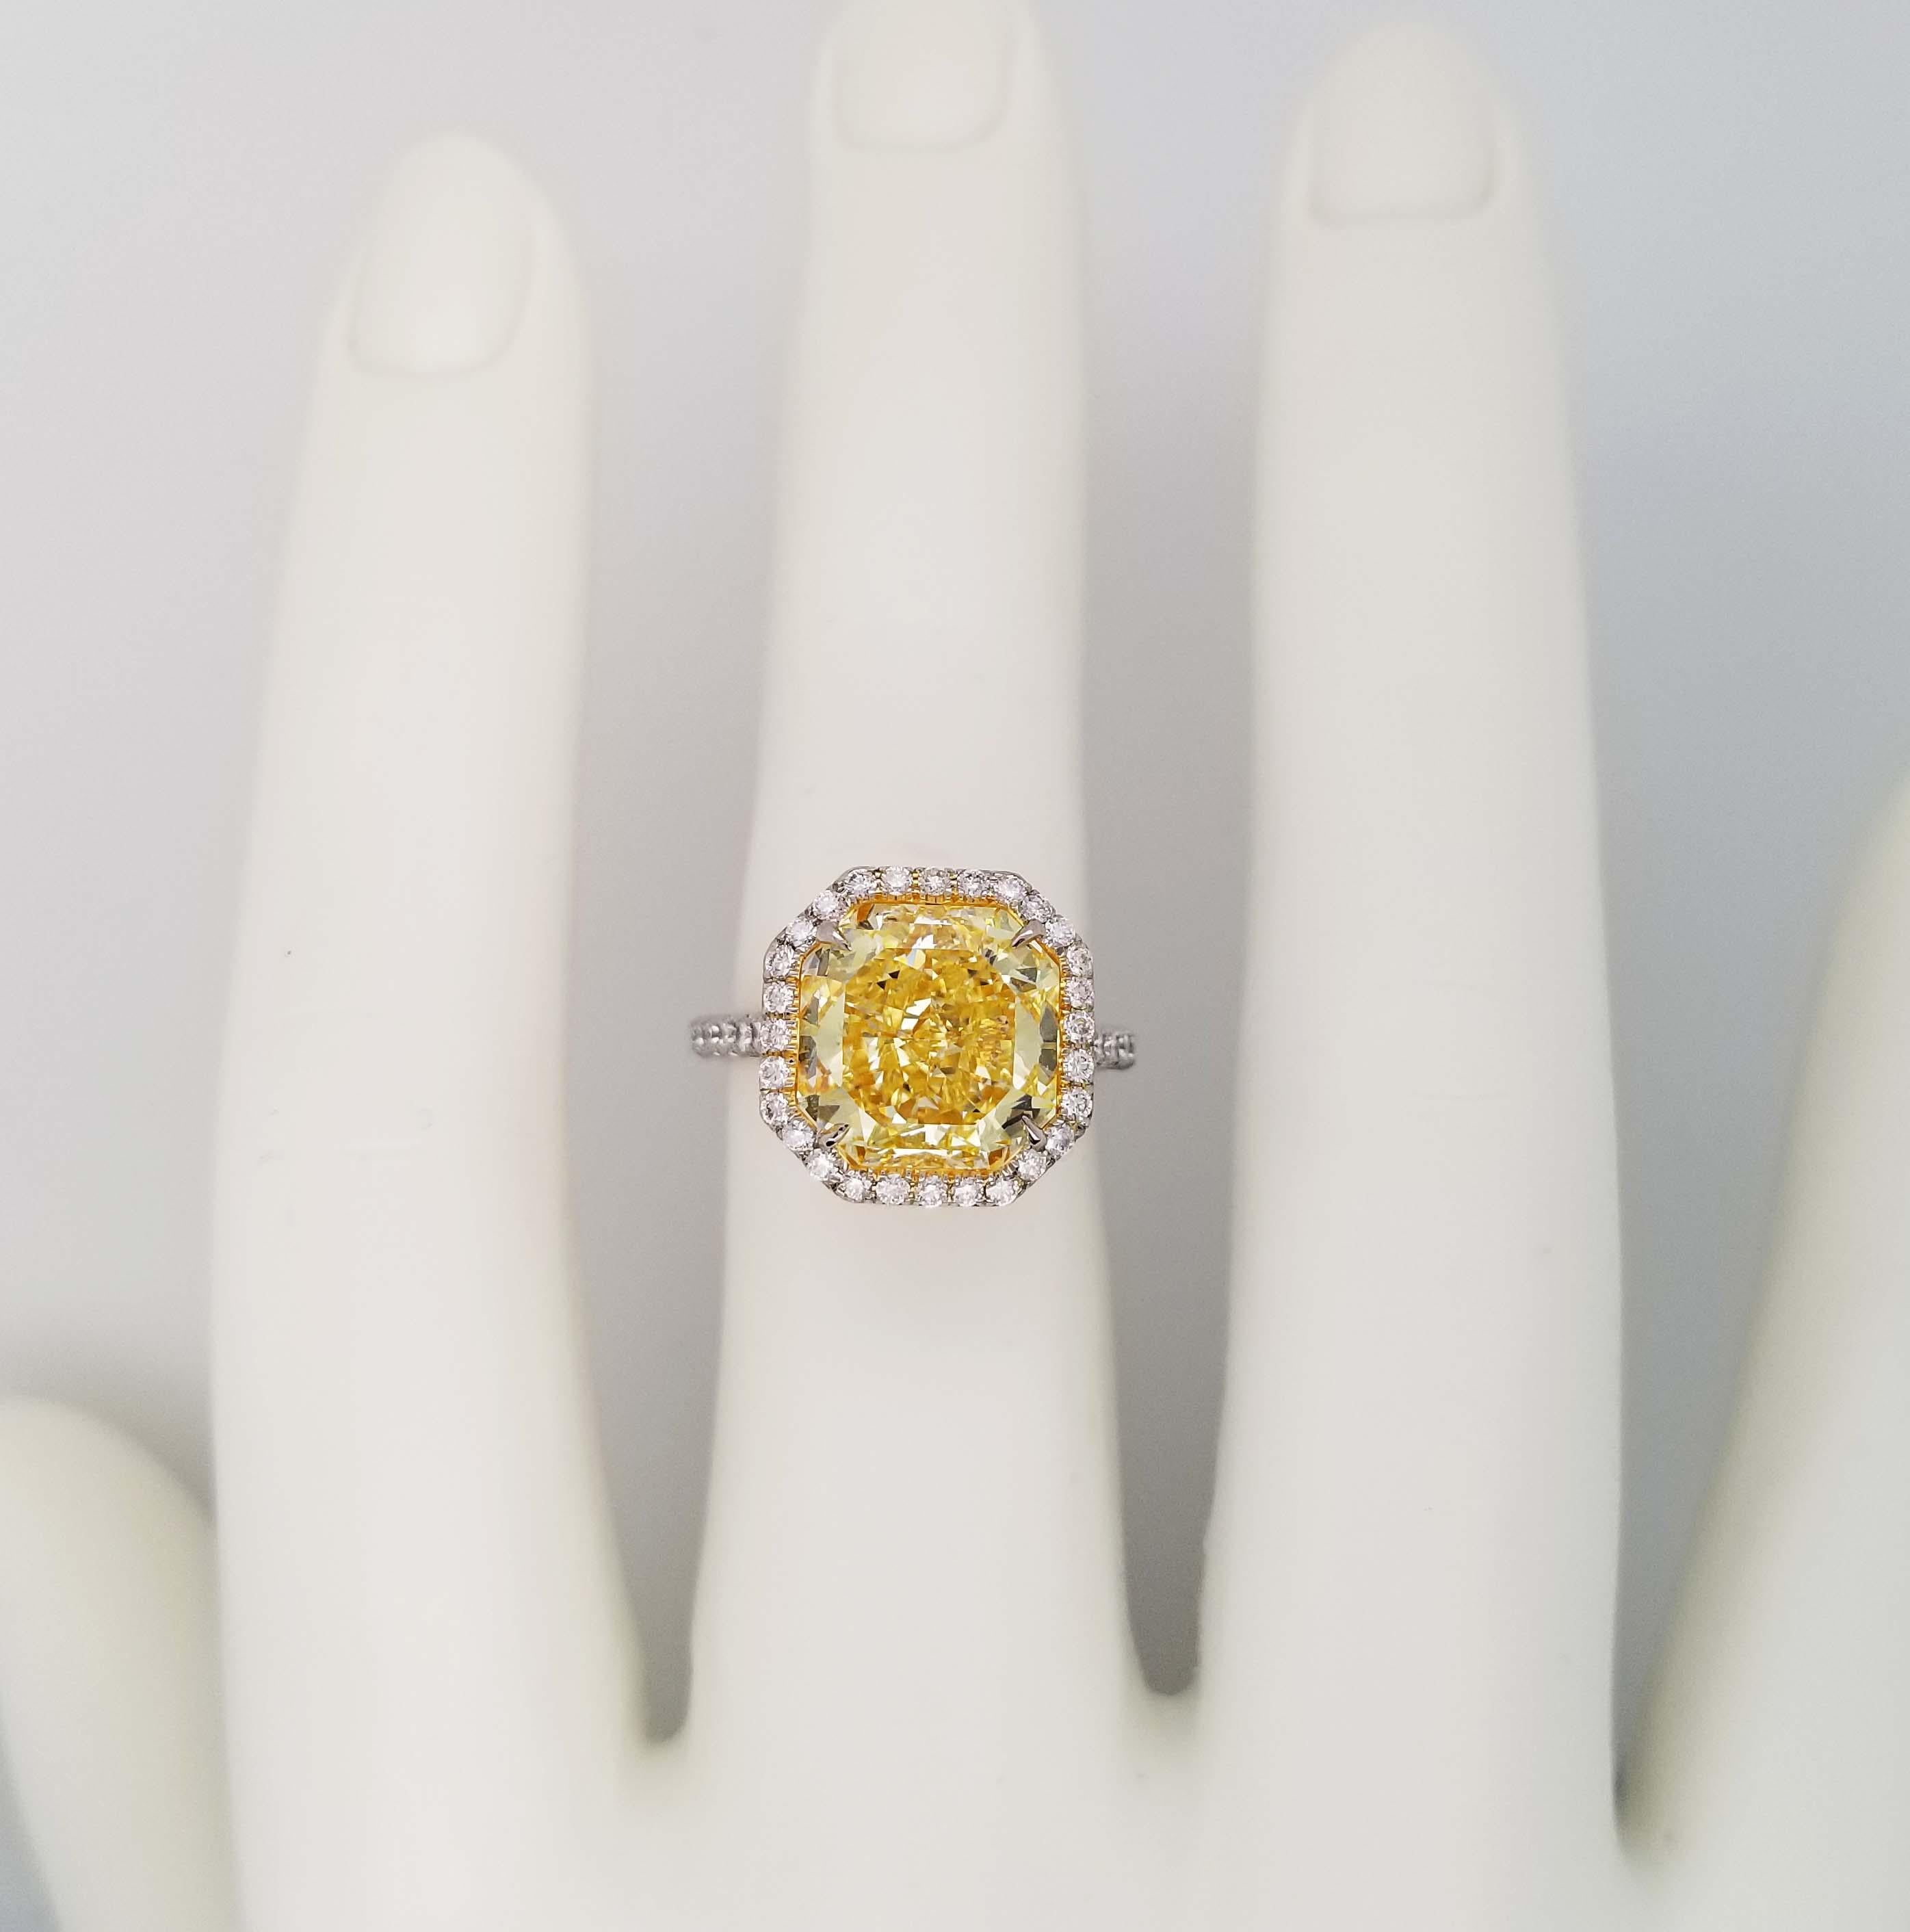 Radiant Cut Scarselli 6 Carat Fancy Yellow Diamond Ring in Platinum For Sale